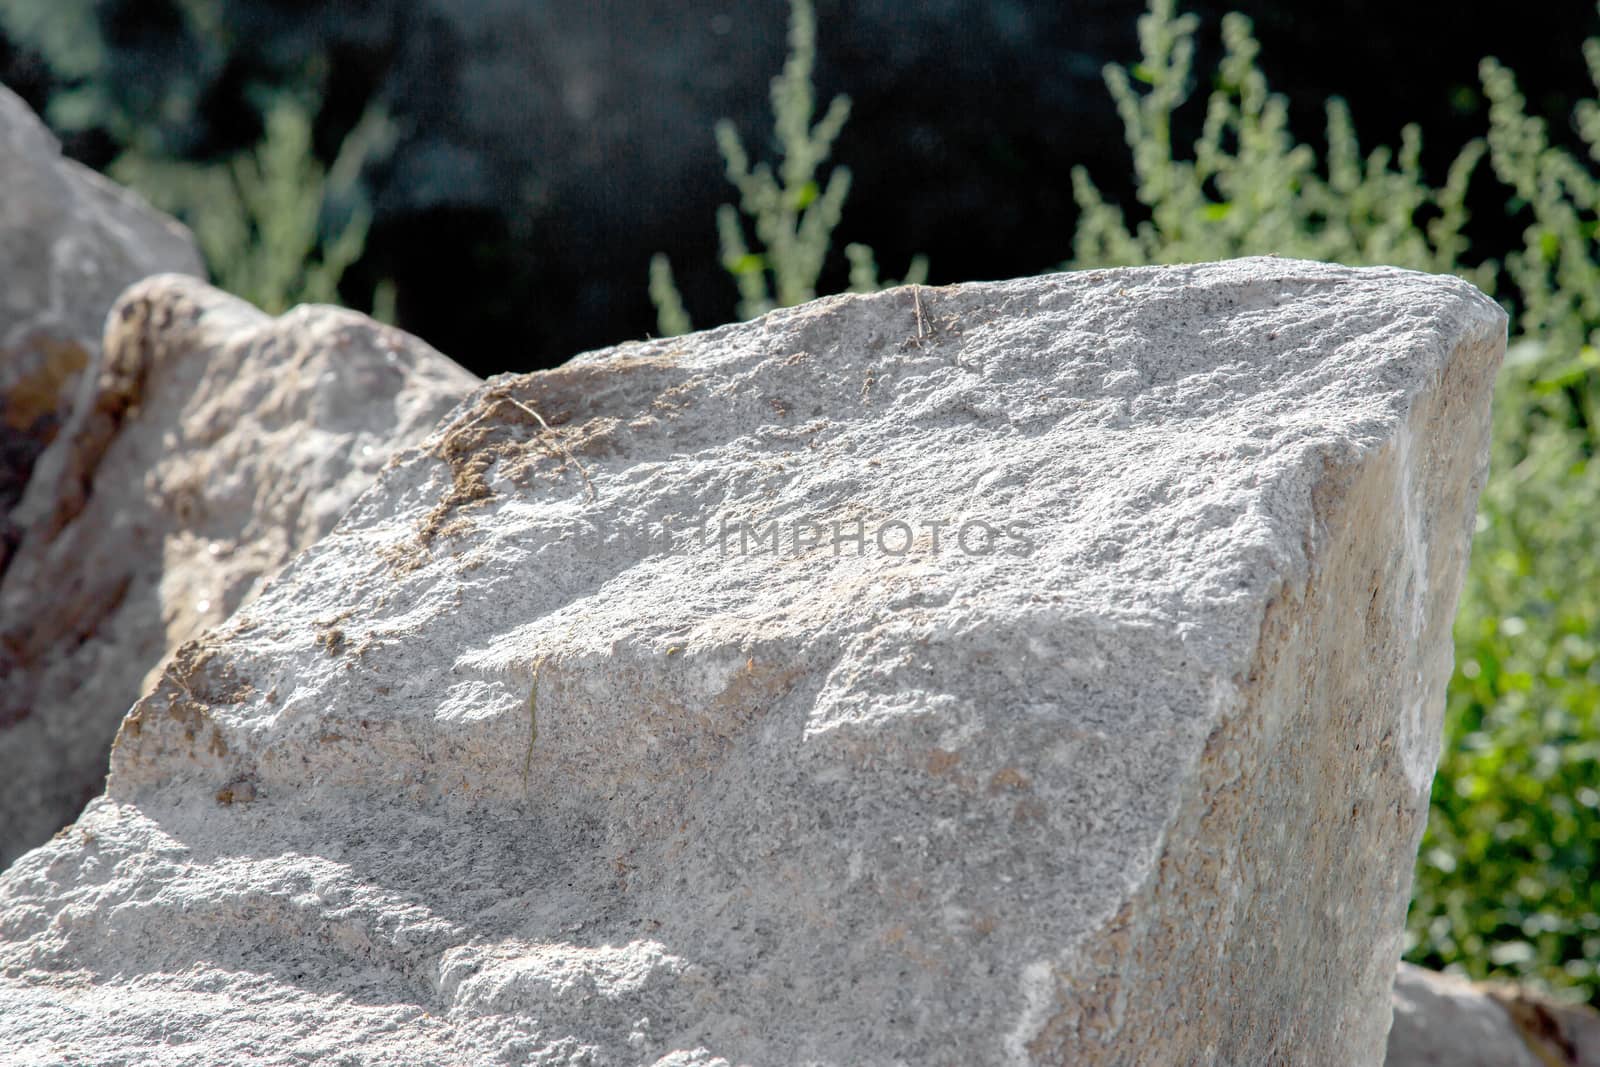 A texture of stones, also suitable as a background